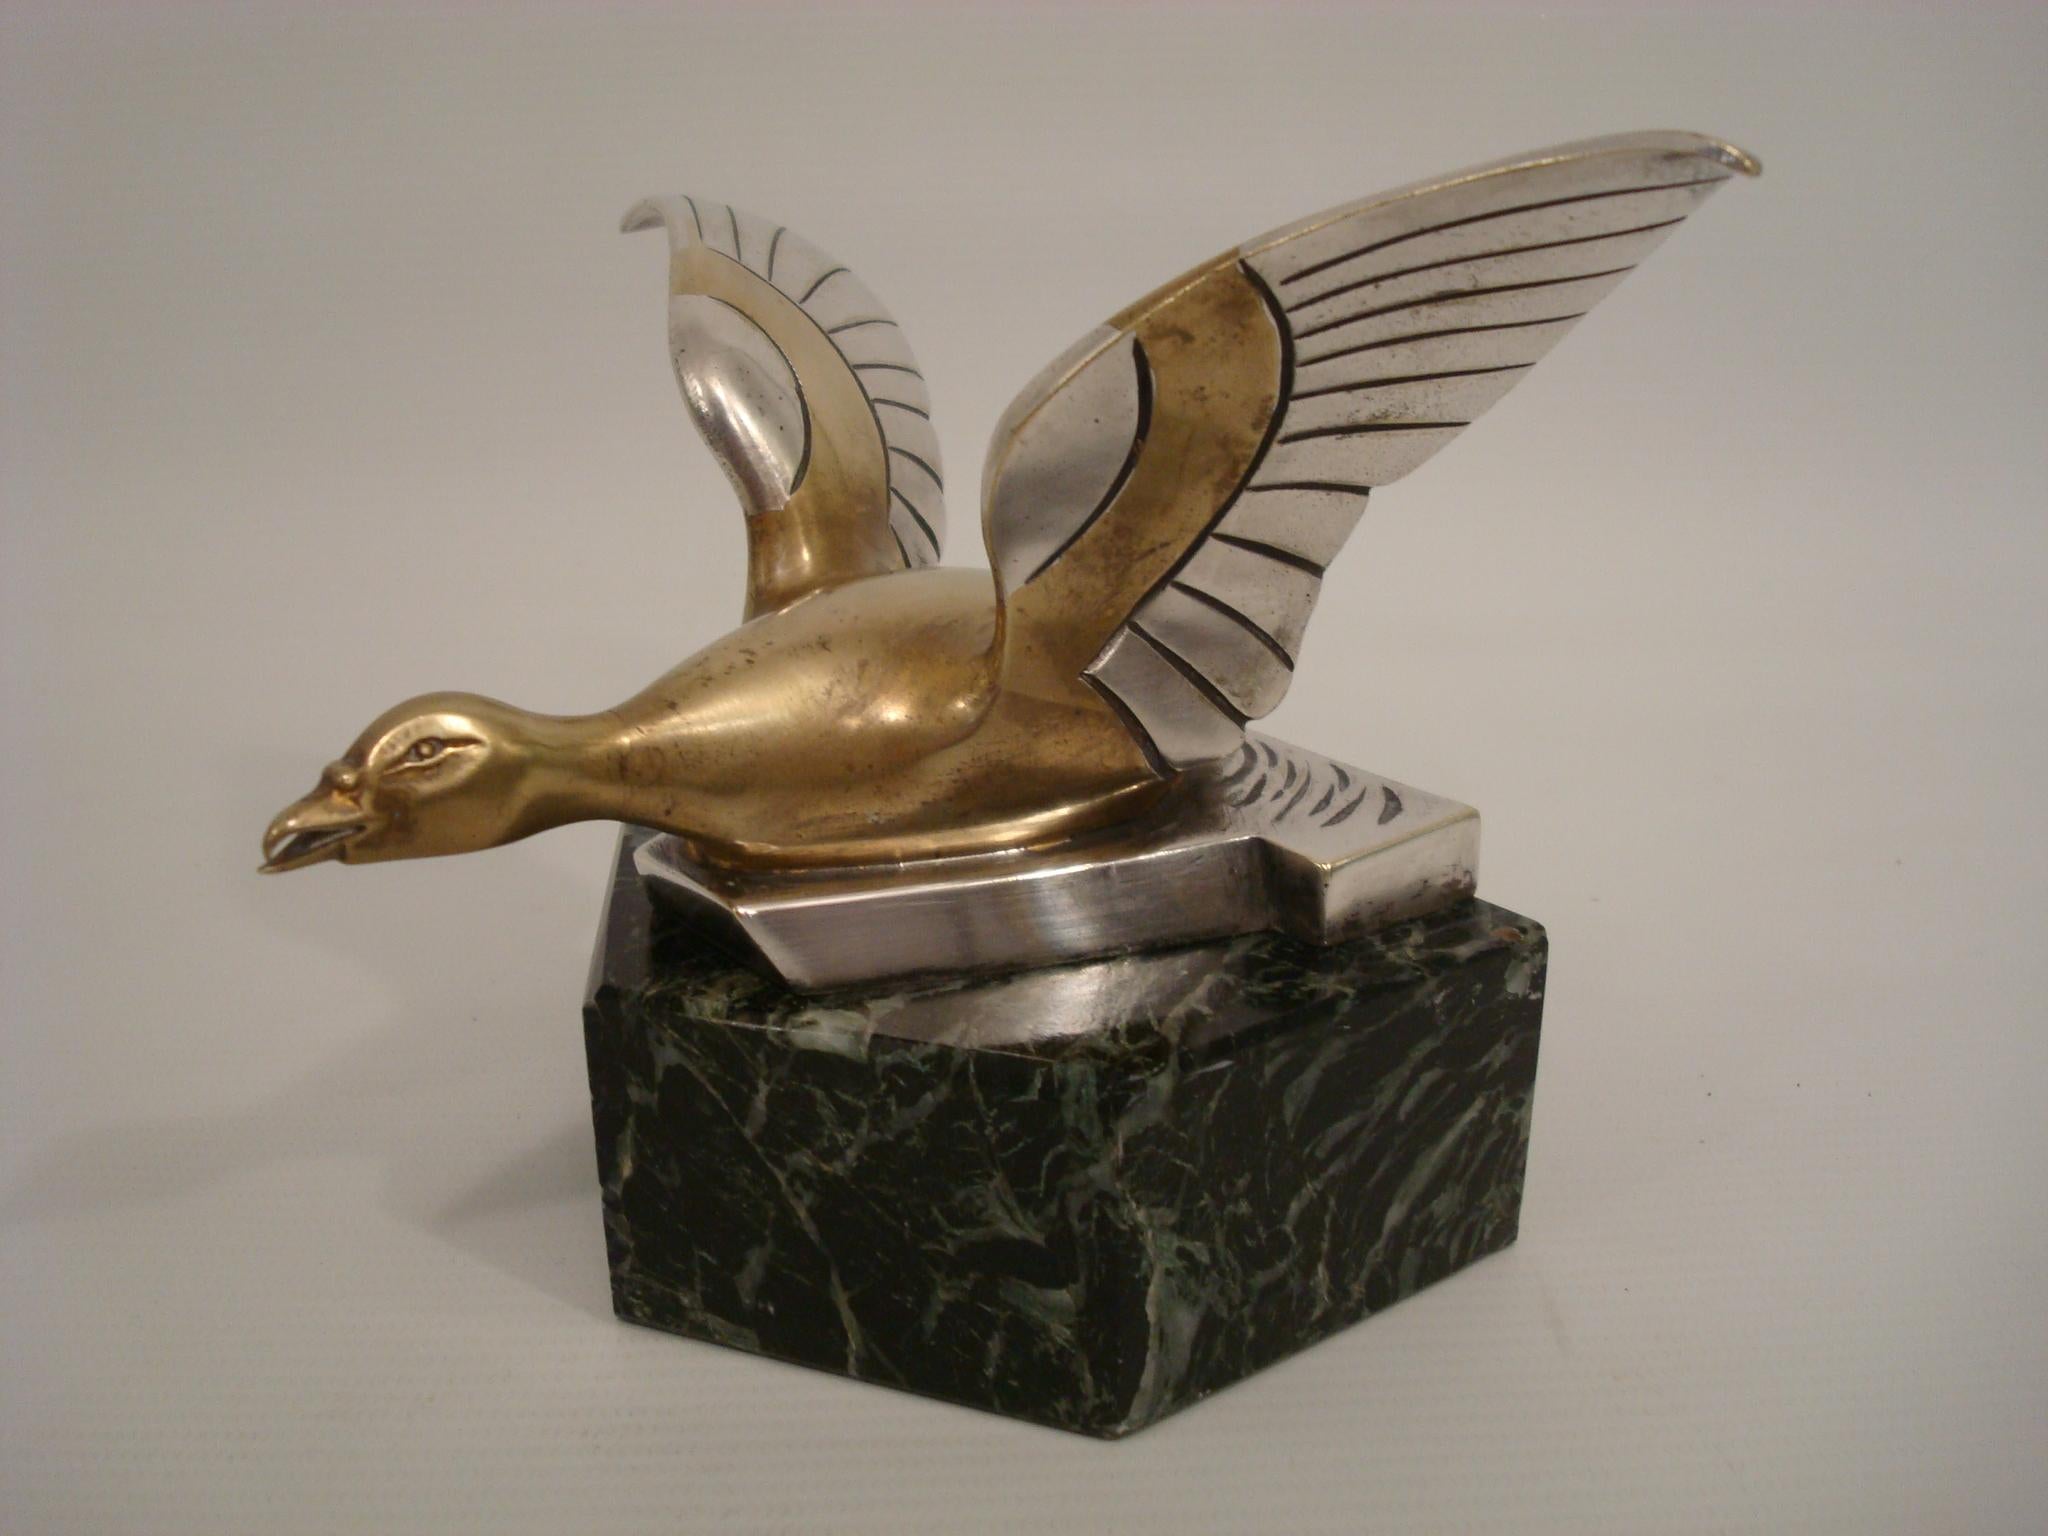 Art Deco Silvered Bronze Sculpture / Paperweight of a Goose. made in  France 1920´s.
Silvered Bronze figure of a flying goose. Mounted over a marble base. Signed F. H. Danvin and stamped made in france. 
Perfect Gift for a sportsman or a hunter.